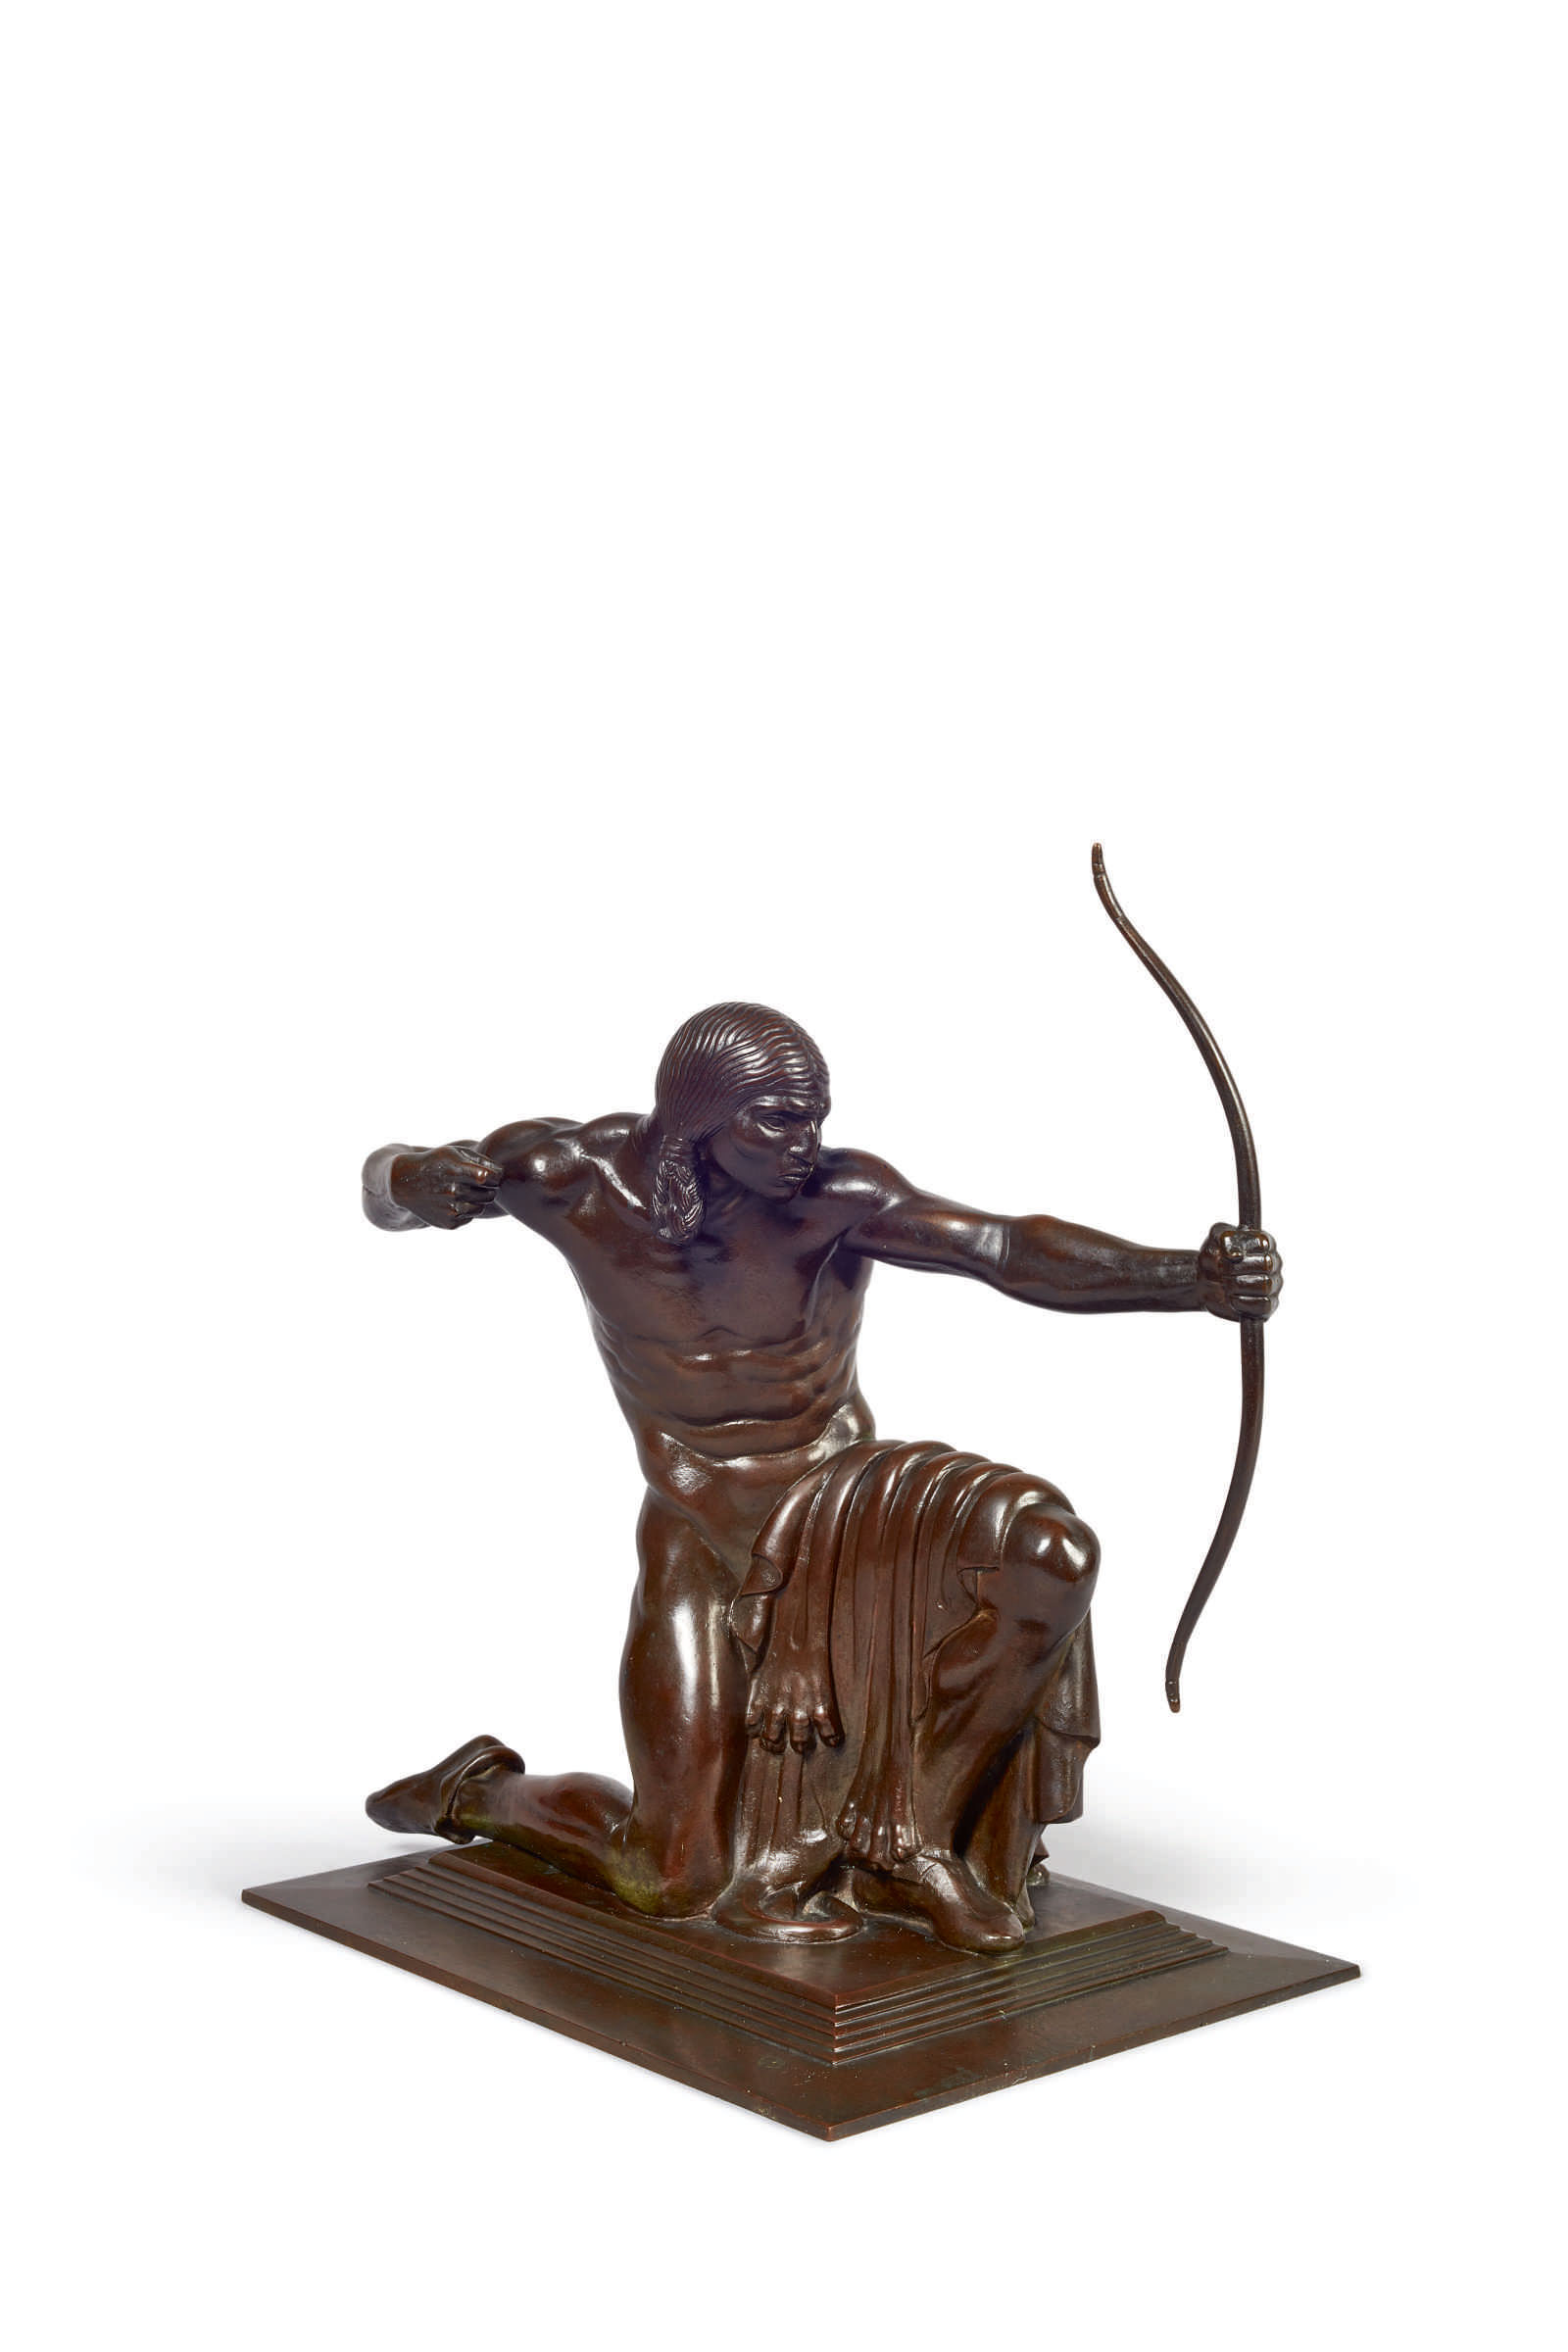 Indian Hunter, a 1914 bronze by Paul Manship, depicts a Native American down on one knee, pulling back the string of his bow. His face is serious and focused. 